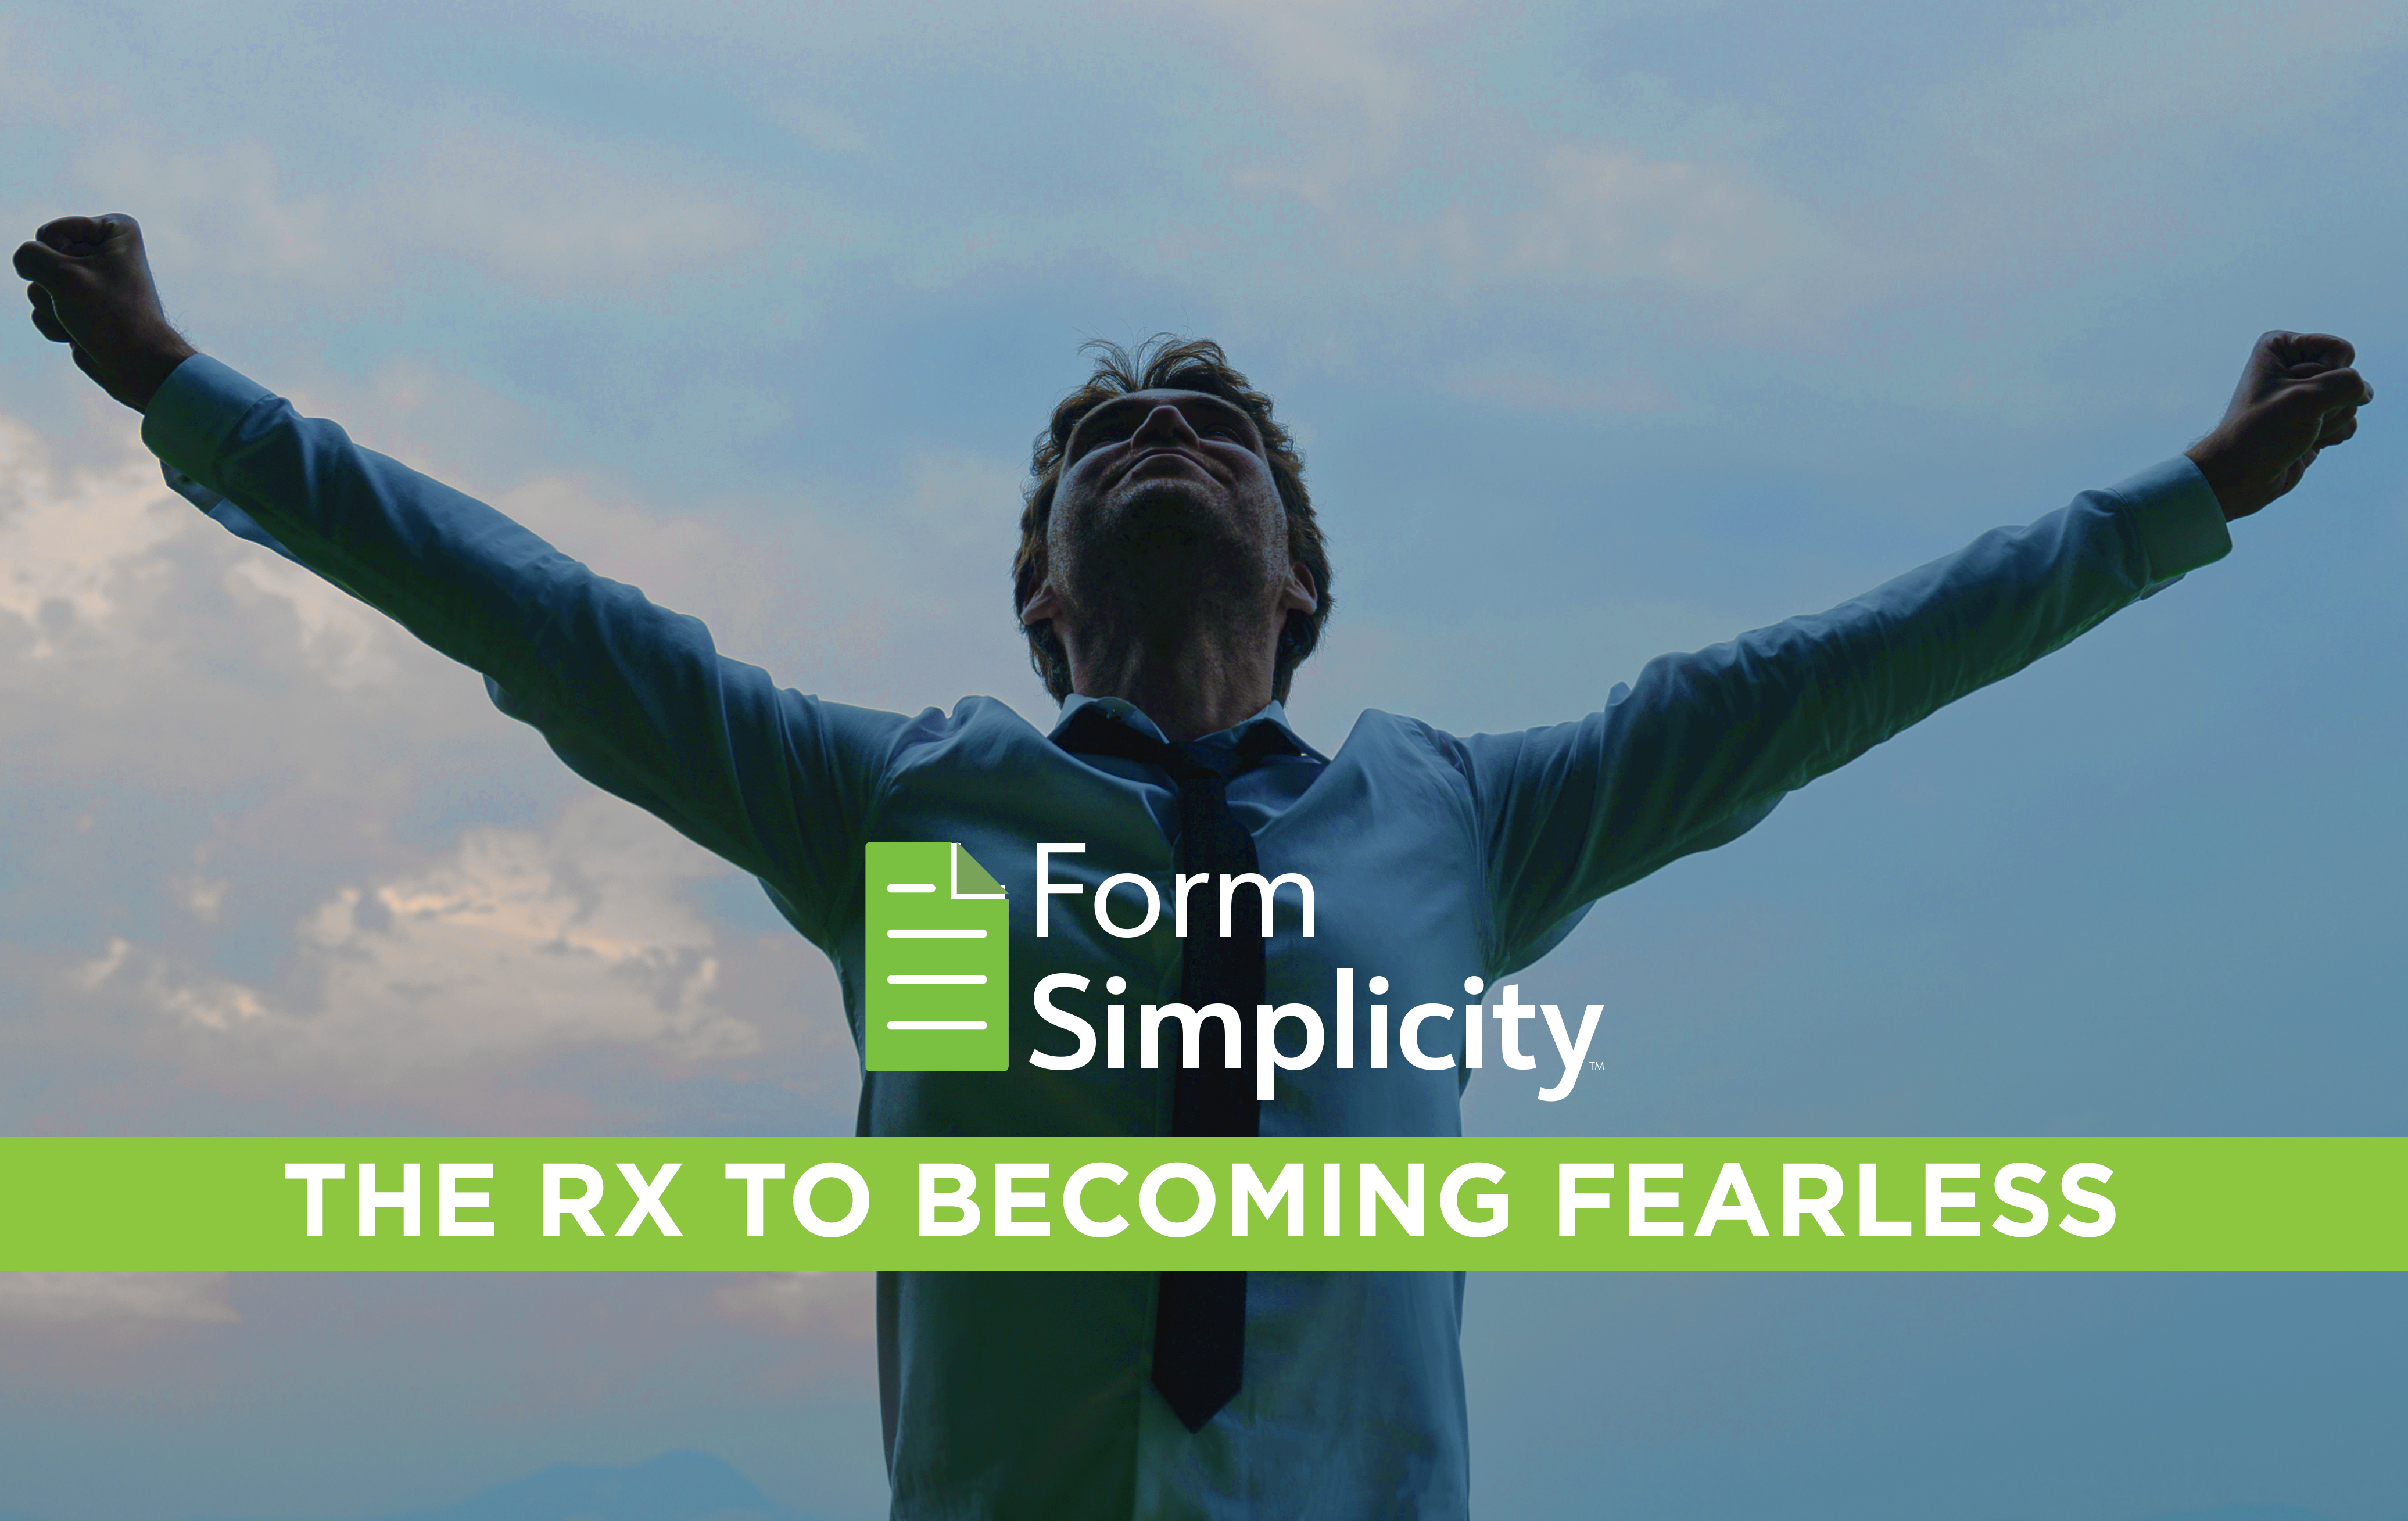 The Rx to Becoming FEARLESS